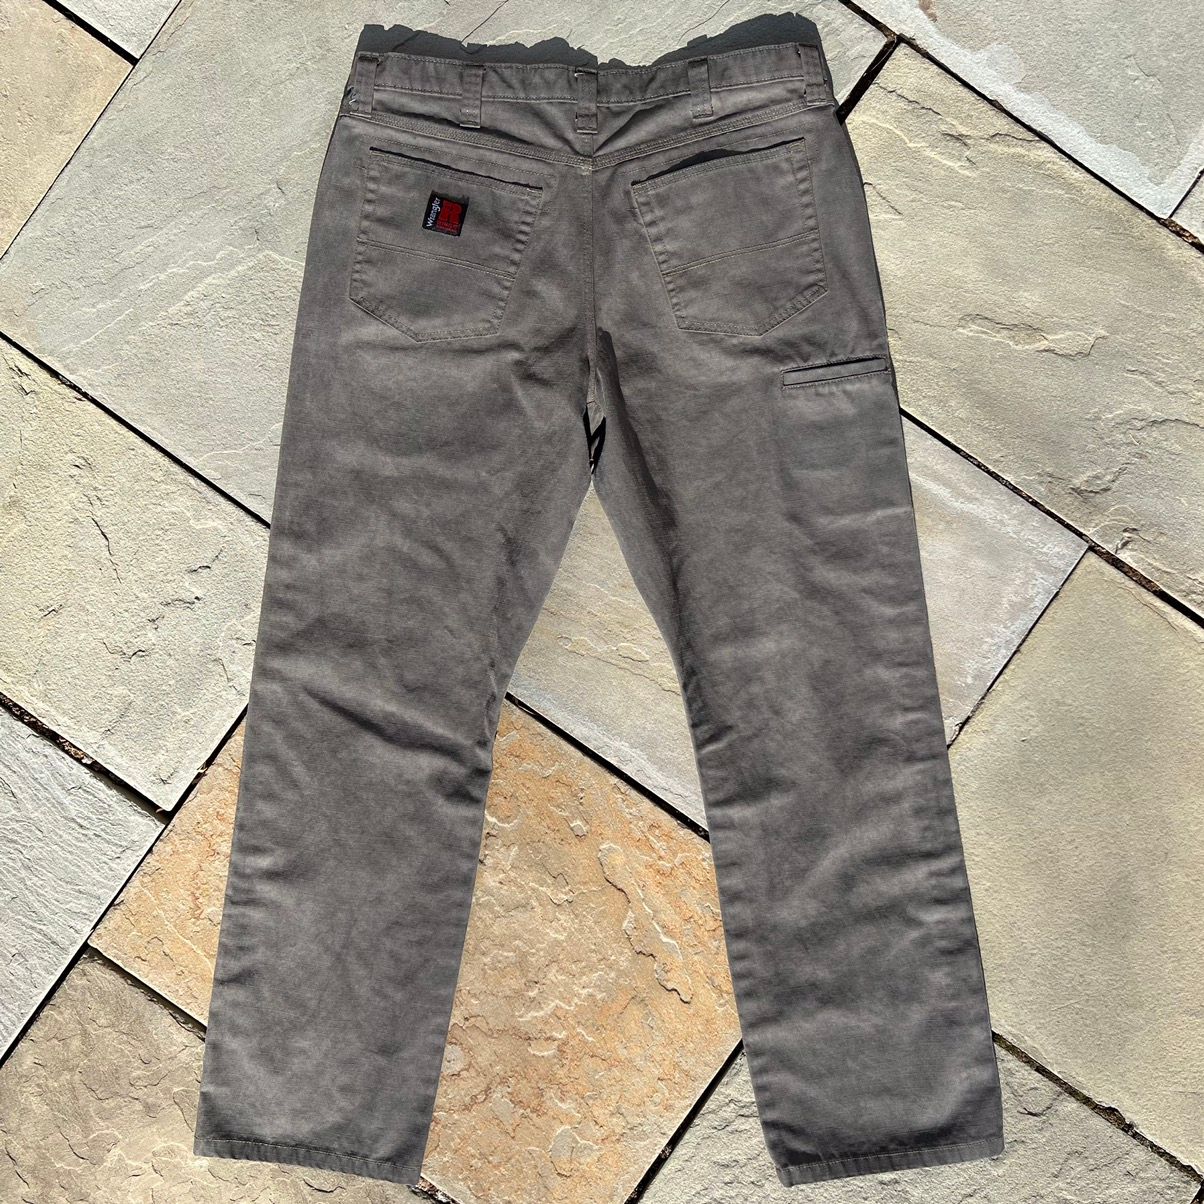 Custom Upcycled Reworked Ripstop Utility Work Pants Size US 36 / EU 52 - 2 Preview